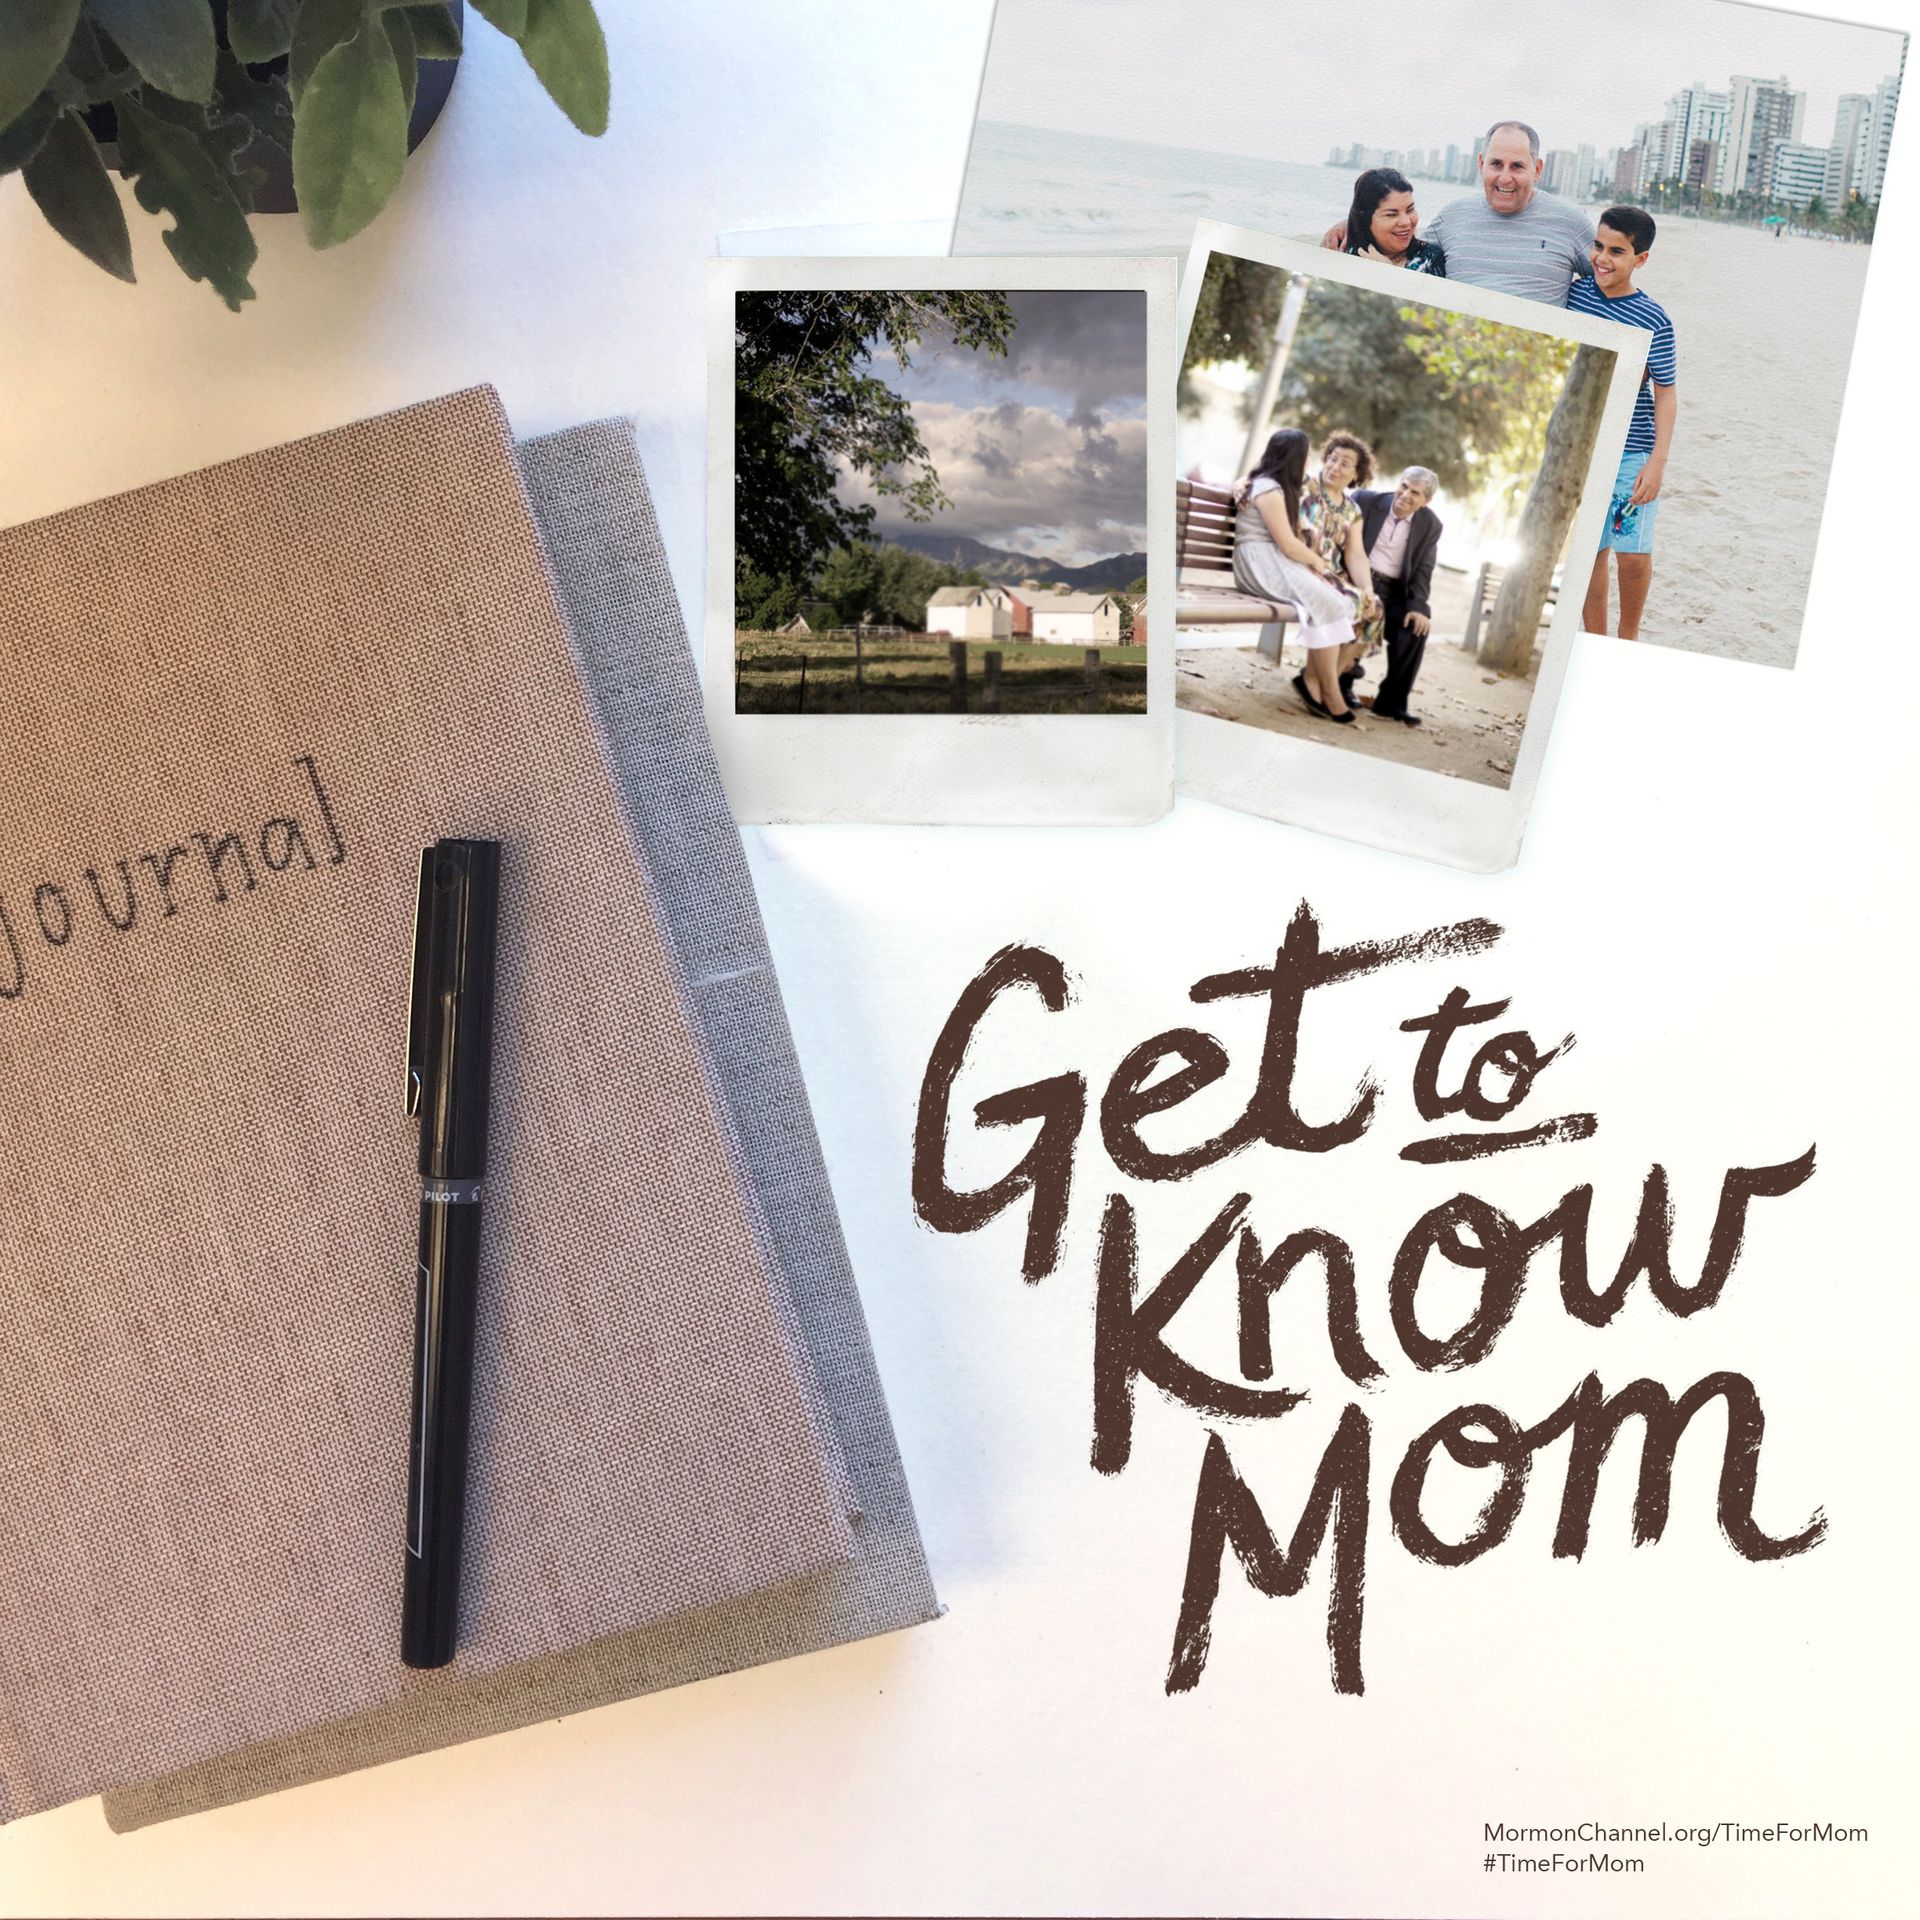 Get to know Mom. Find out how to make #TimeForMom here. © undefined ipCode 1.